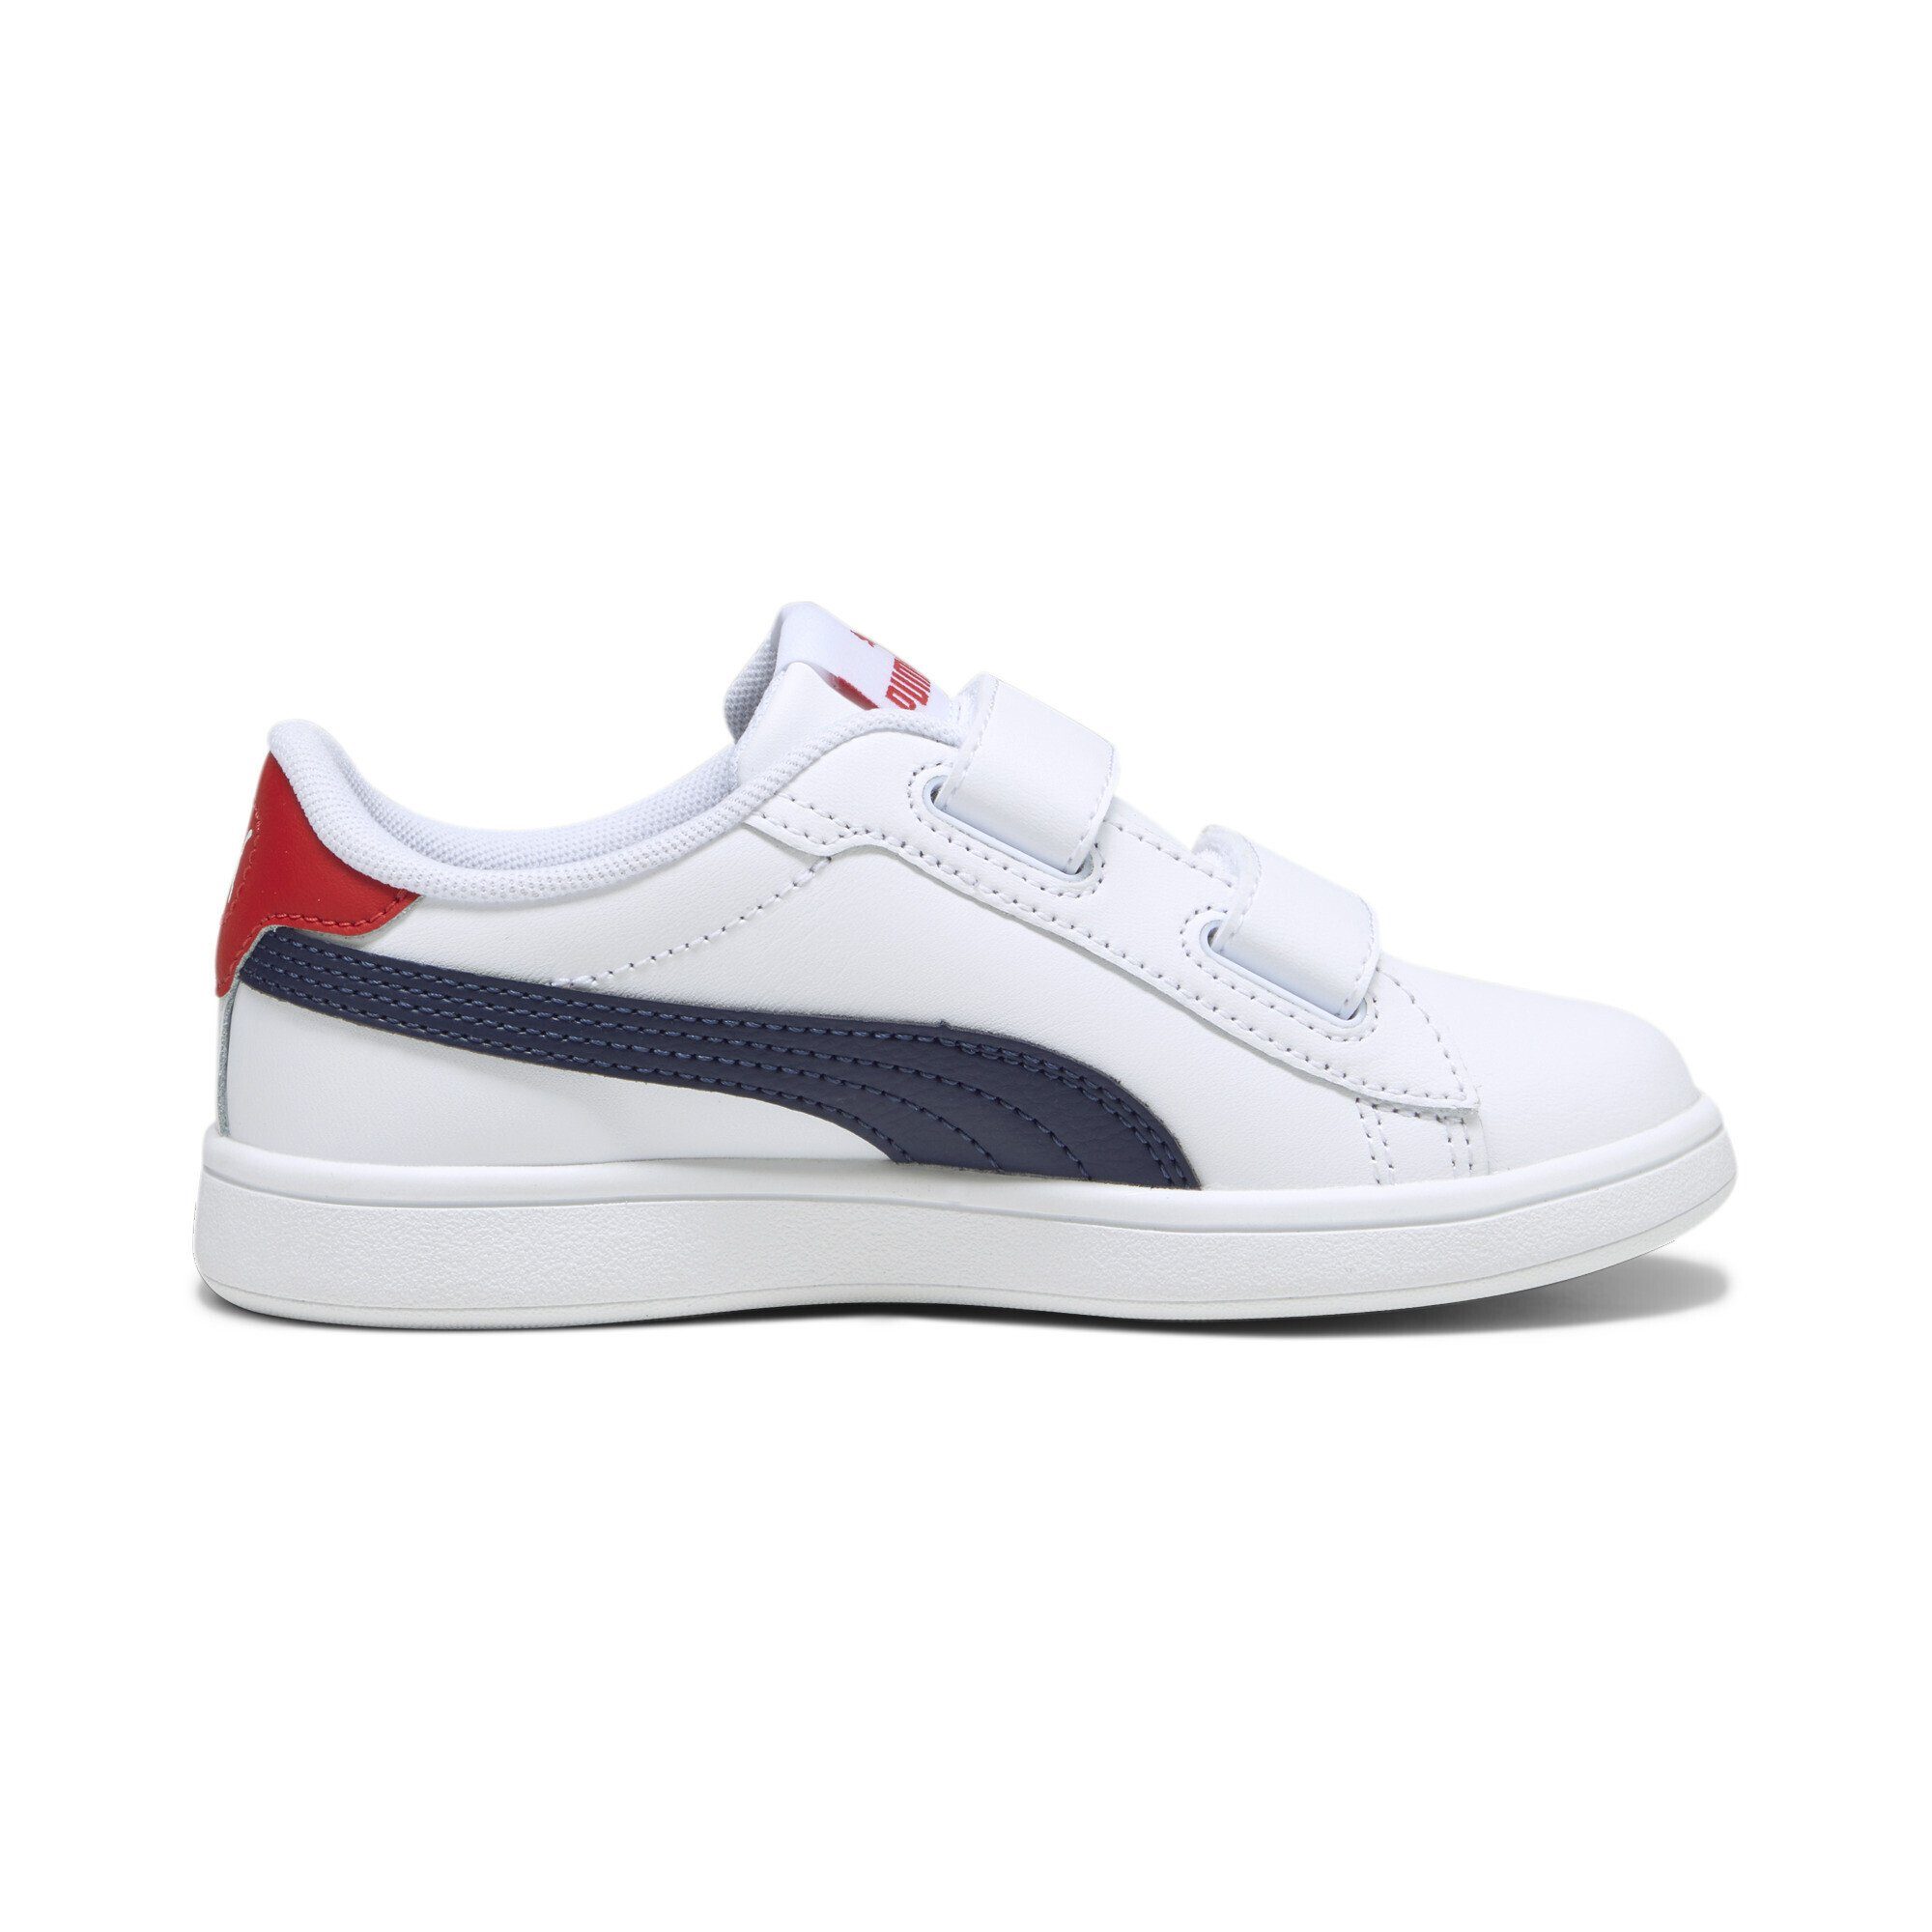 PUMA Smash 3.0 Sneaker All Red Time Sneakers Blue For Leather White Navy